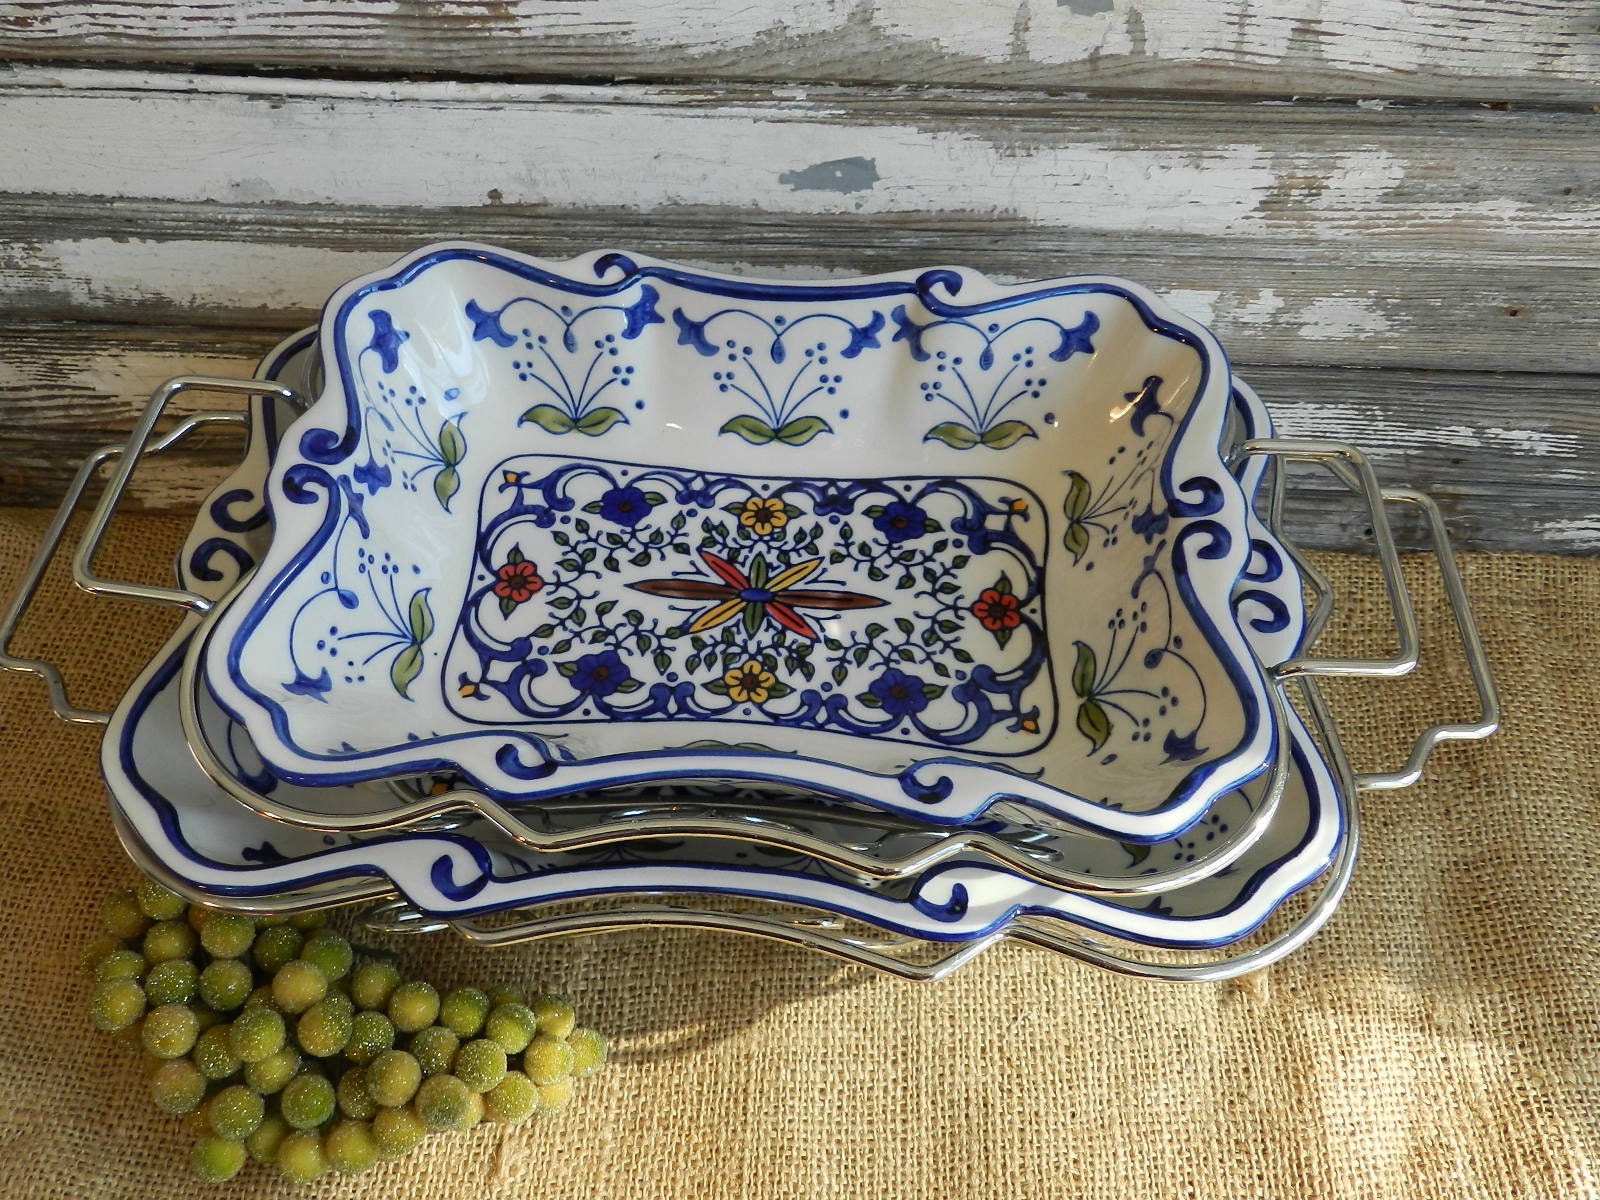 White Italy Ceramic Oven Baking Trays Large Hot Dish Serving Round Tureen  Dinner Holiday Party Farmhouse Kitchen Cottage Grape Leaf Embossed 